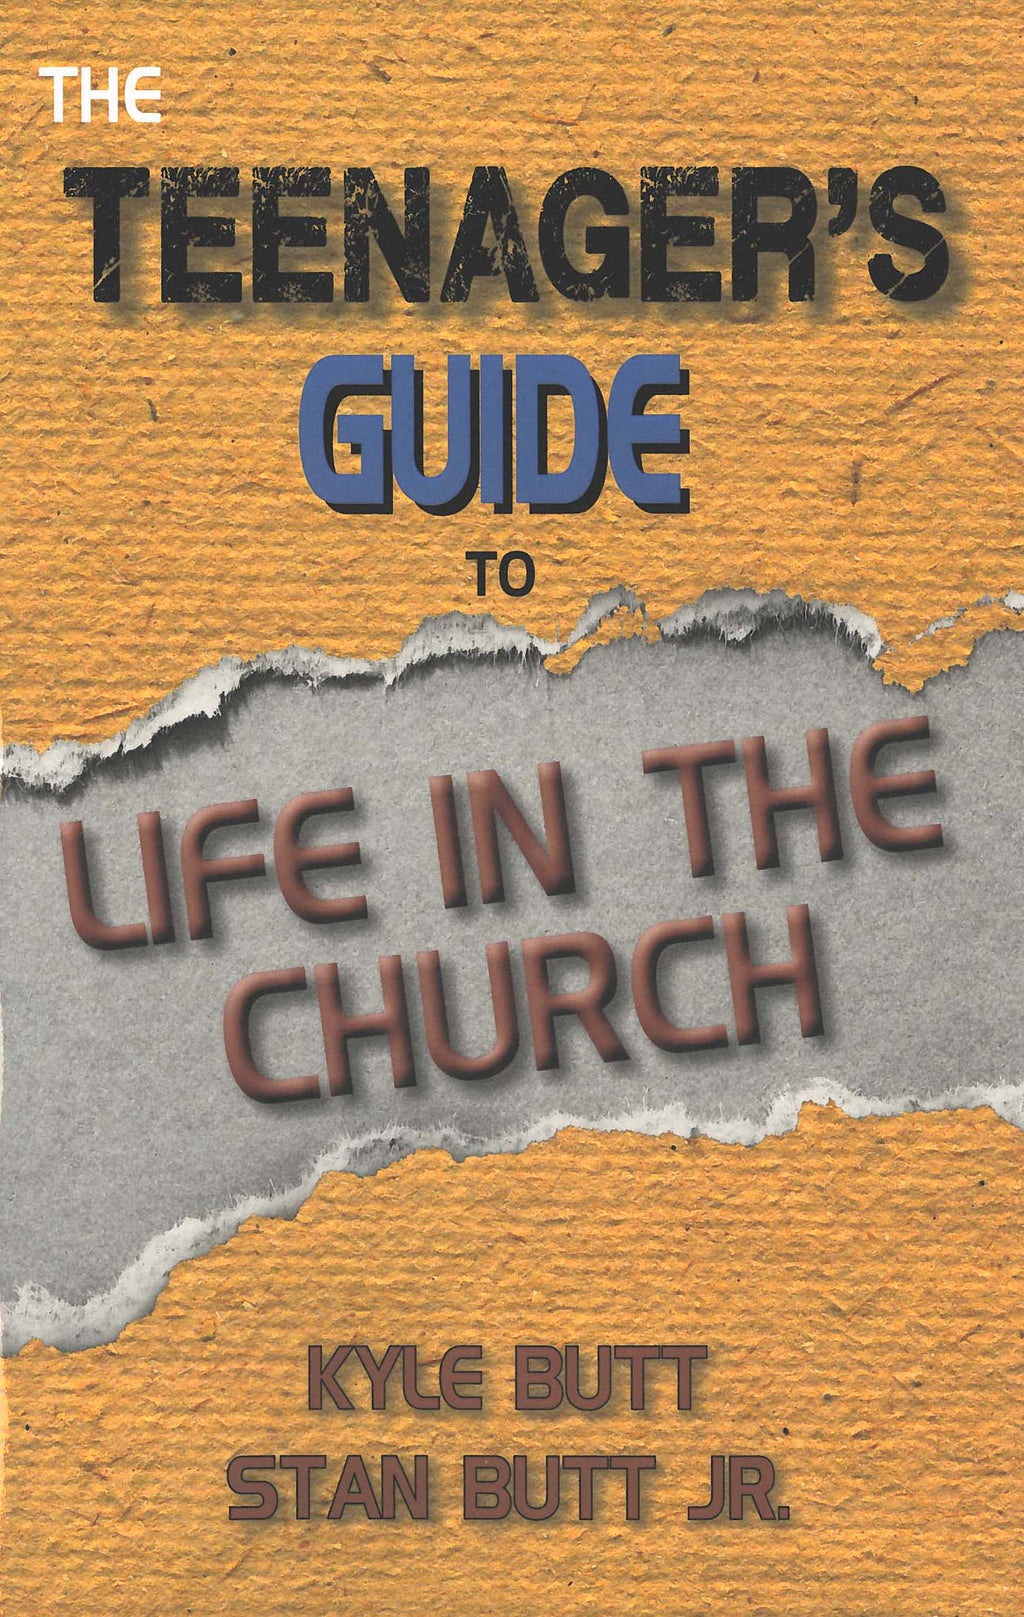 Teenager's Guide to Life in the Church